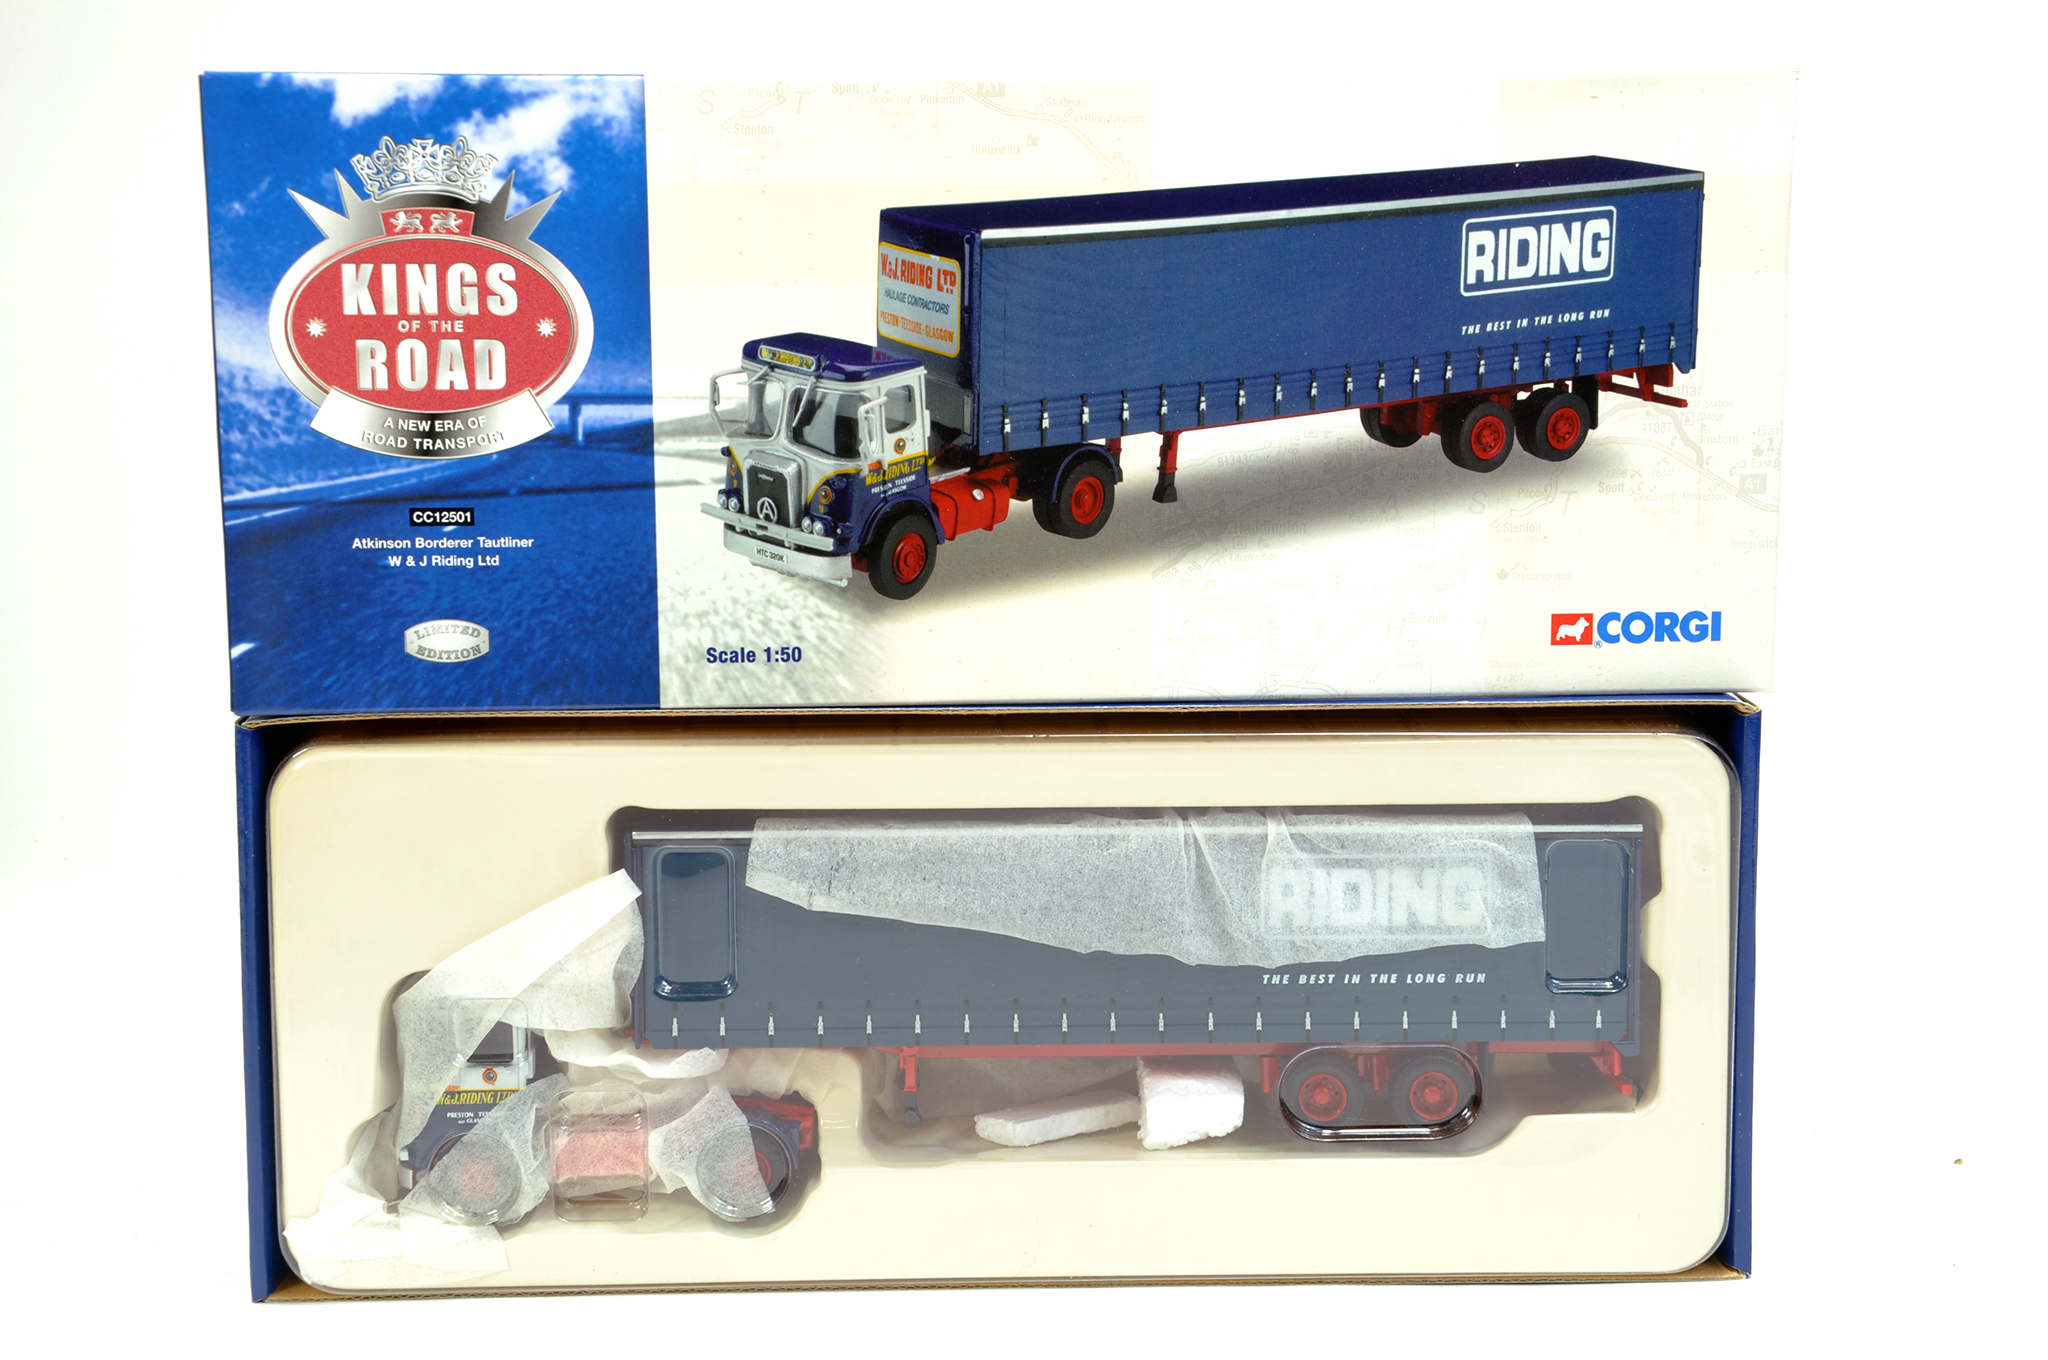 Corgi 1/50 diecast truck issue comprising Kings of the Road Series No. CC12501 Atkinson Borderer